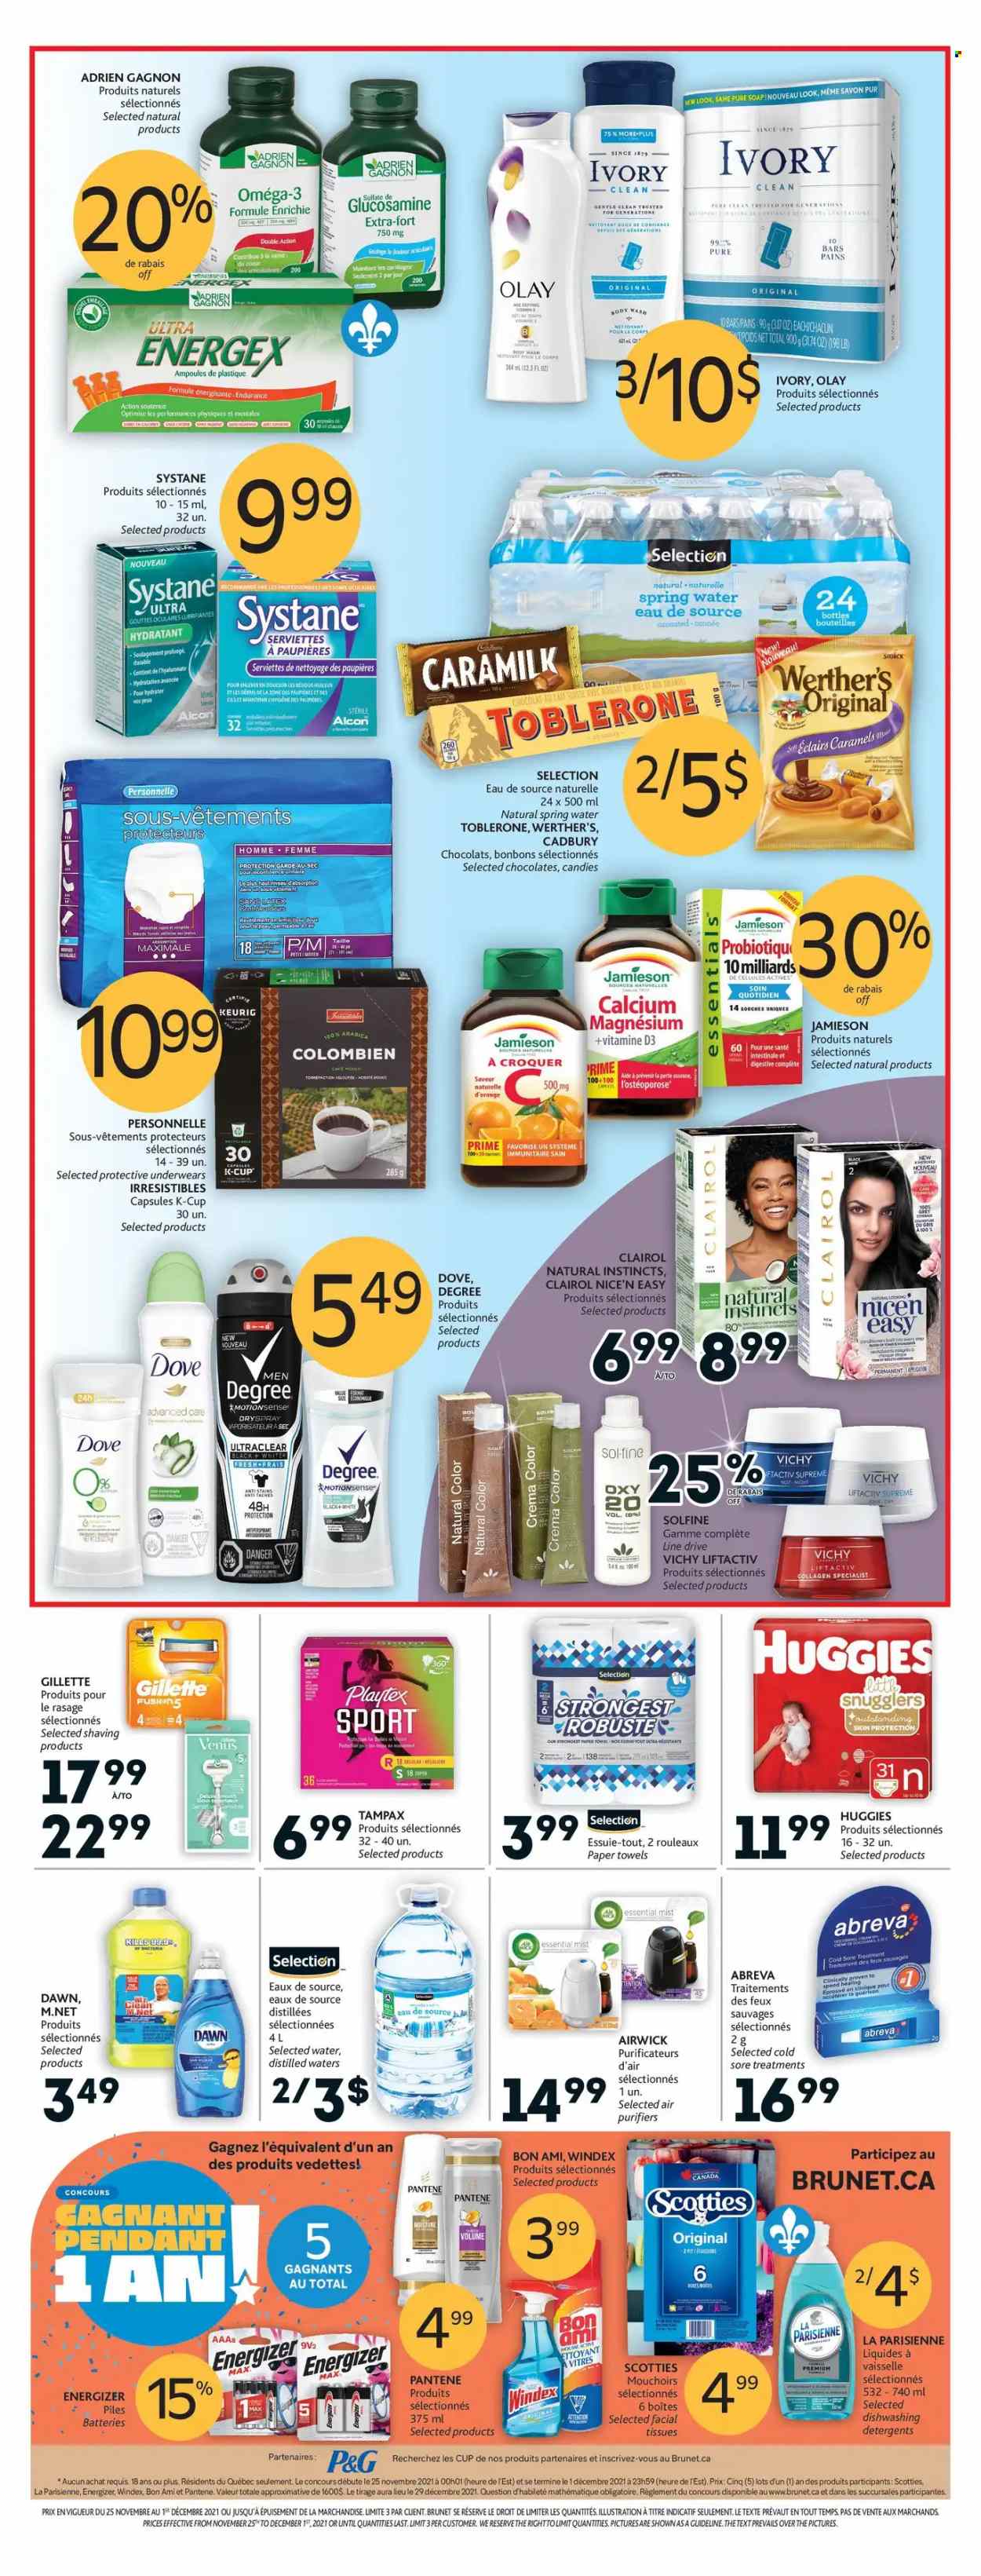 thumbnail - Brunet Flyer - November 25, 2021 - December 01, 2021 - Sales products - tissues, kitchen towels, paper towels, Windex, body wash, Vichy, Playtex, Abreva, Olay, Clairol, Solfine, Venus, glucosamine, magnesium, Omega-3, vitamin D3, calcium, Dove, Energizer, Gillette, Systane, Huggies, Pantene. Page 2.